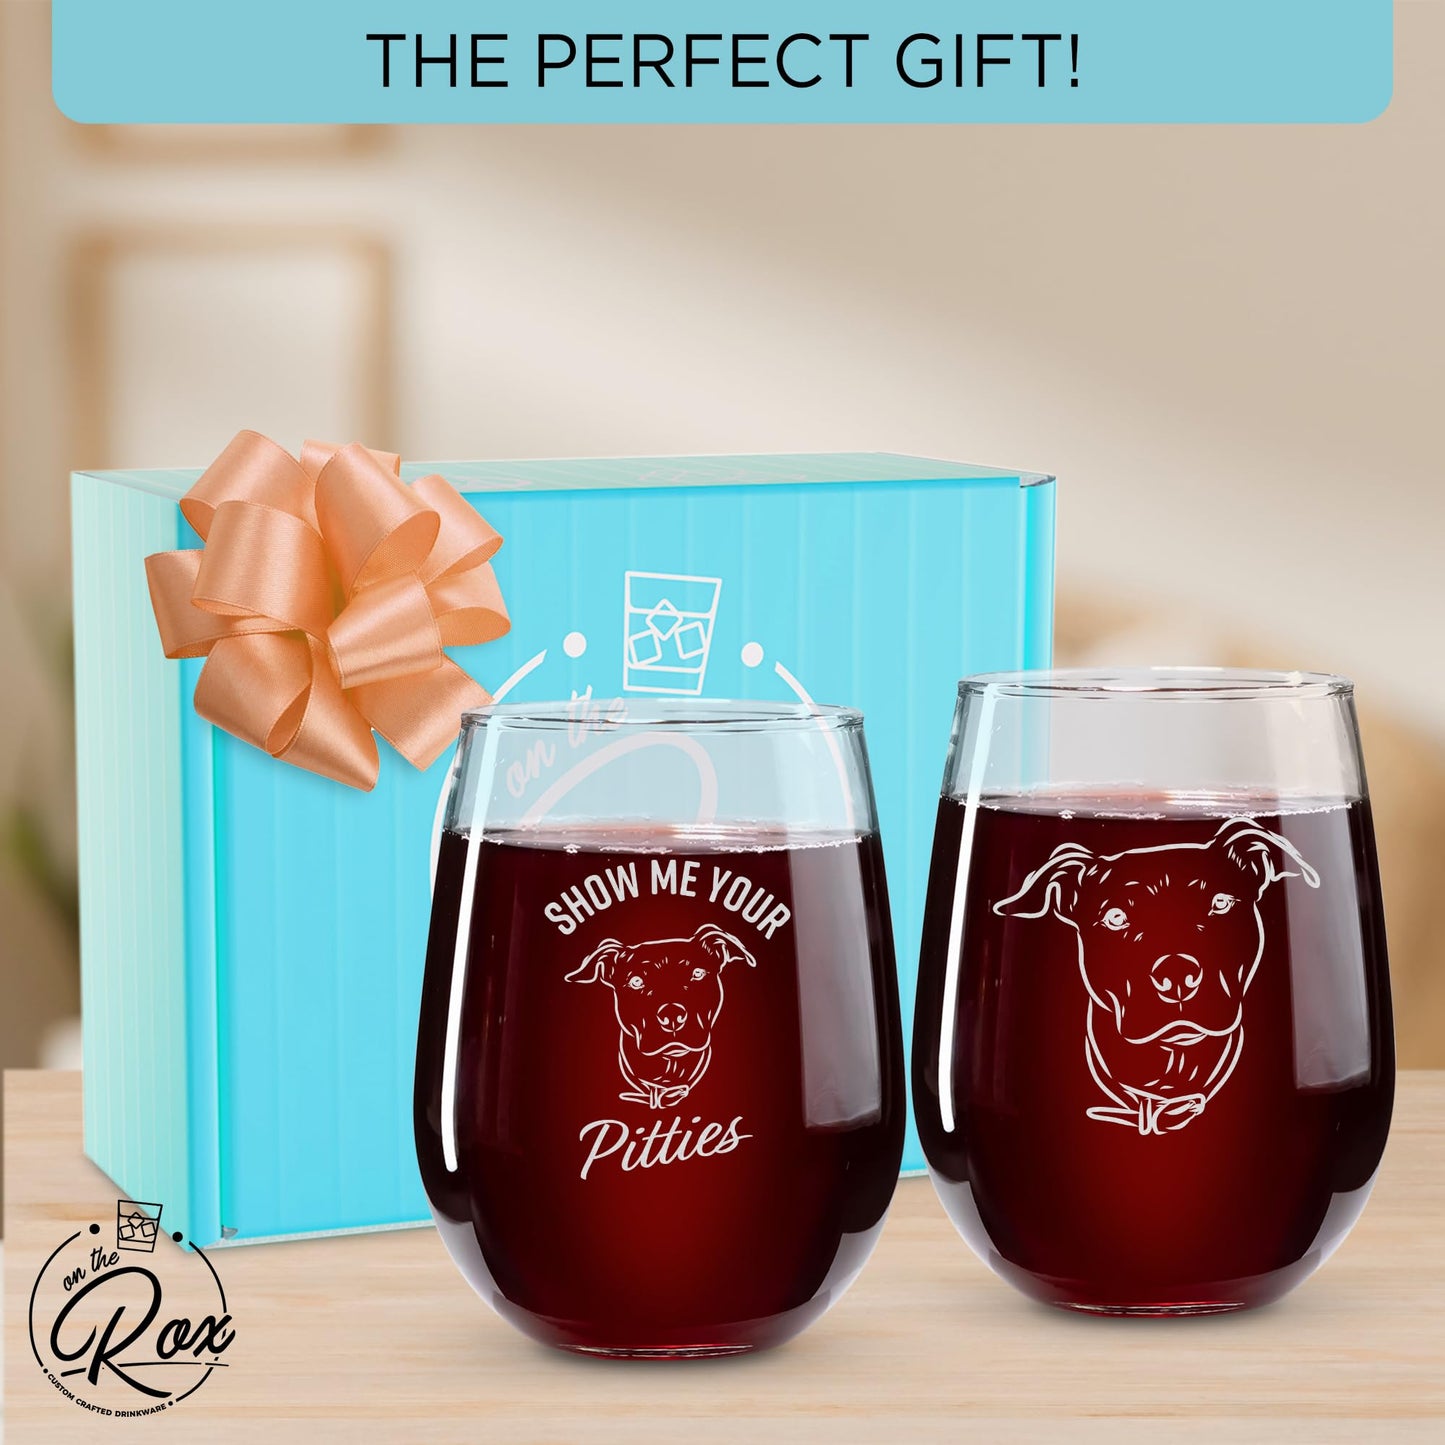 On The Rox Drinks Wine Pitbull Gifts for Pitbull Lovers - Show Me Your Pitties Stemless Wine Glass Set of 2- Funny Pit Bull Dog Lover Gifts for Mom, Grandma - Cute Pet Wine Glasses for Women